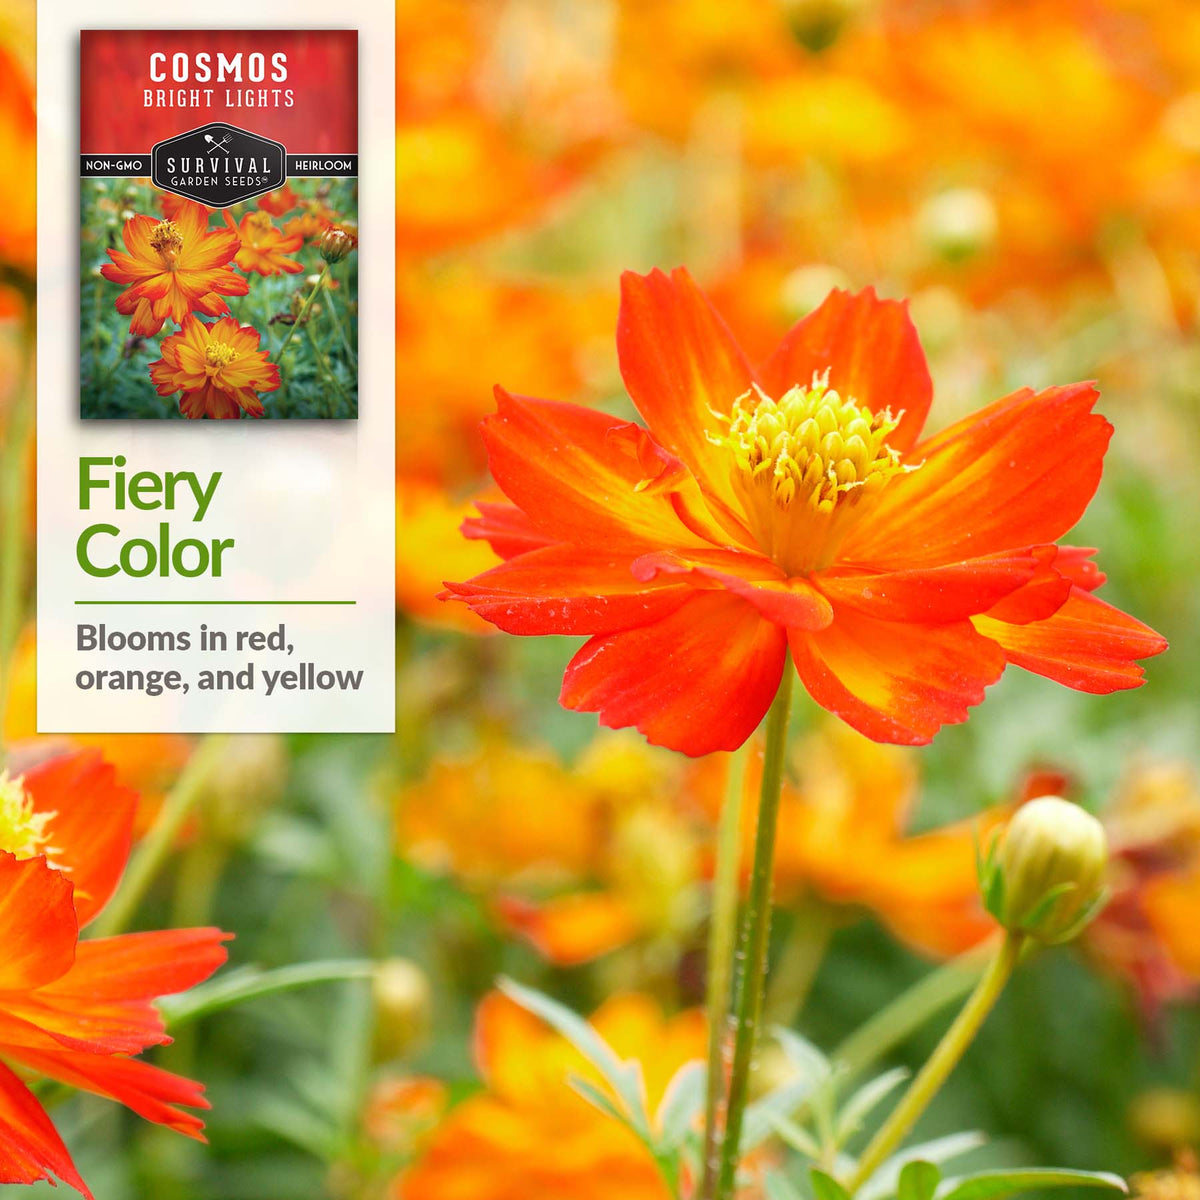 Bright Lights Cosmos have blooms in red, orange and yellow